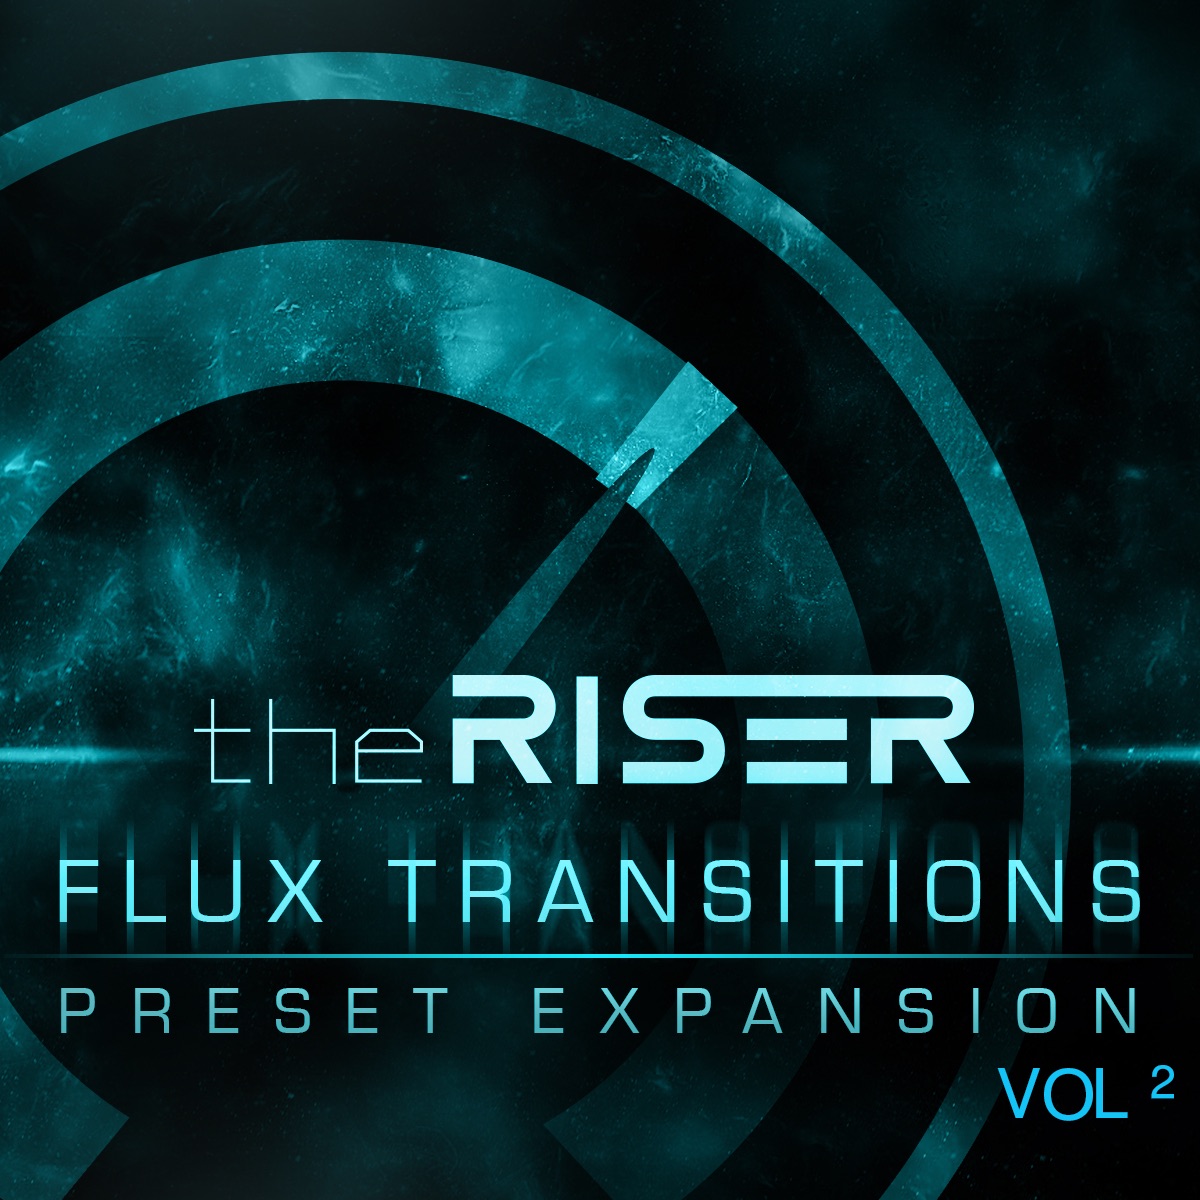 Flux Transitions Vol 2 for theRiser